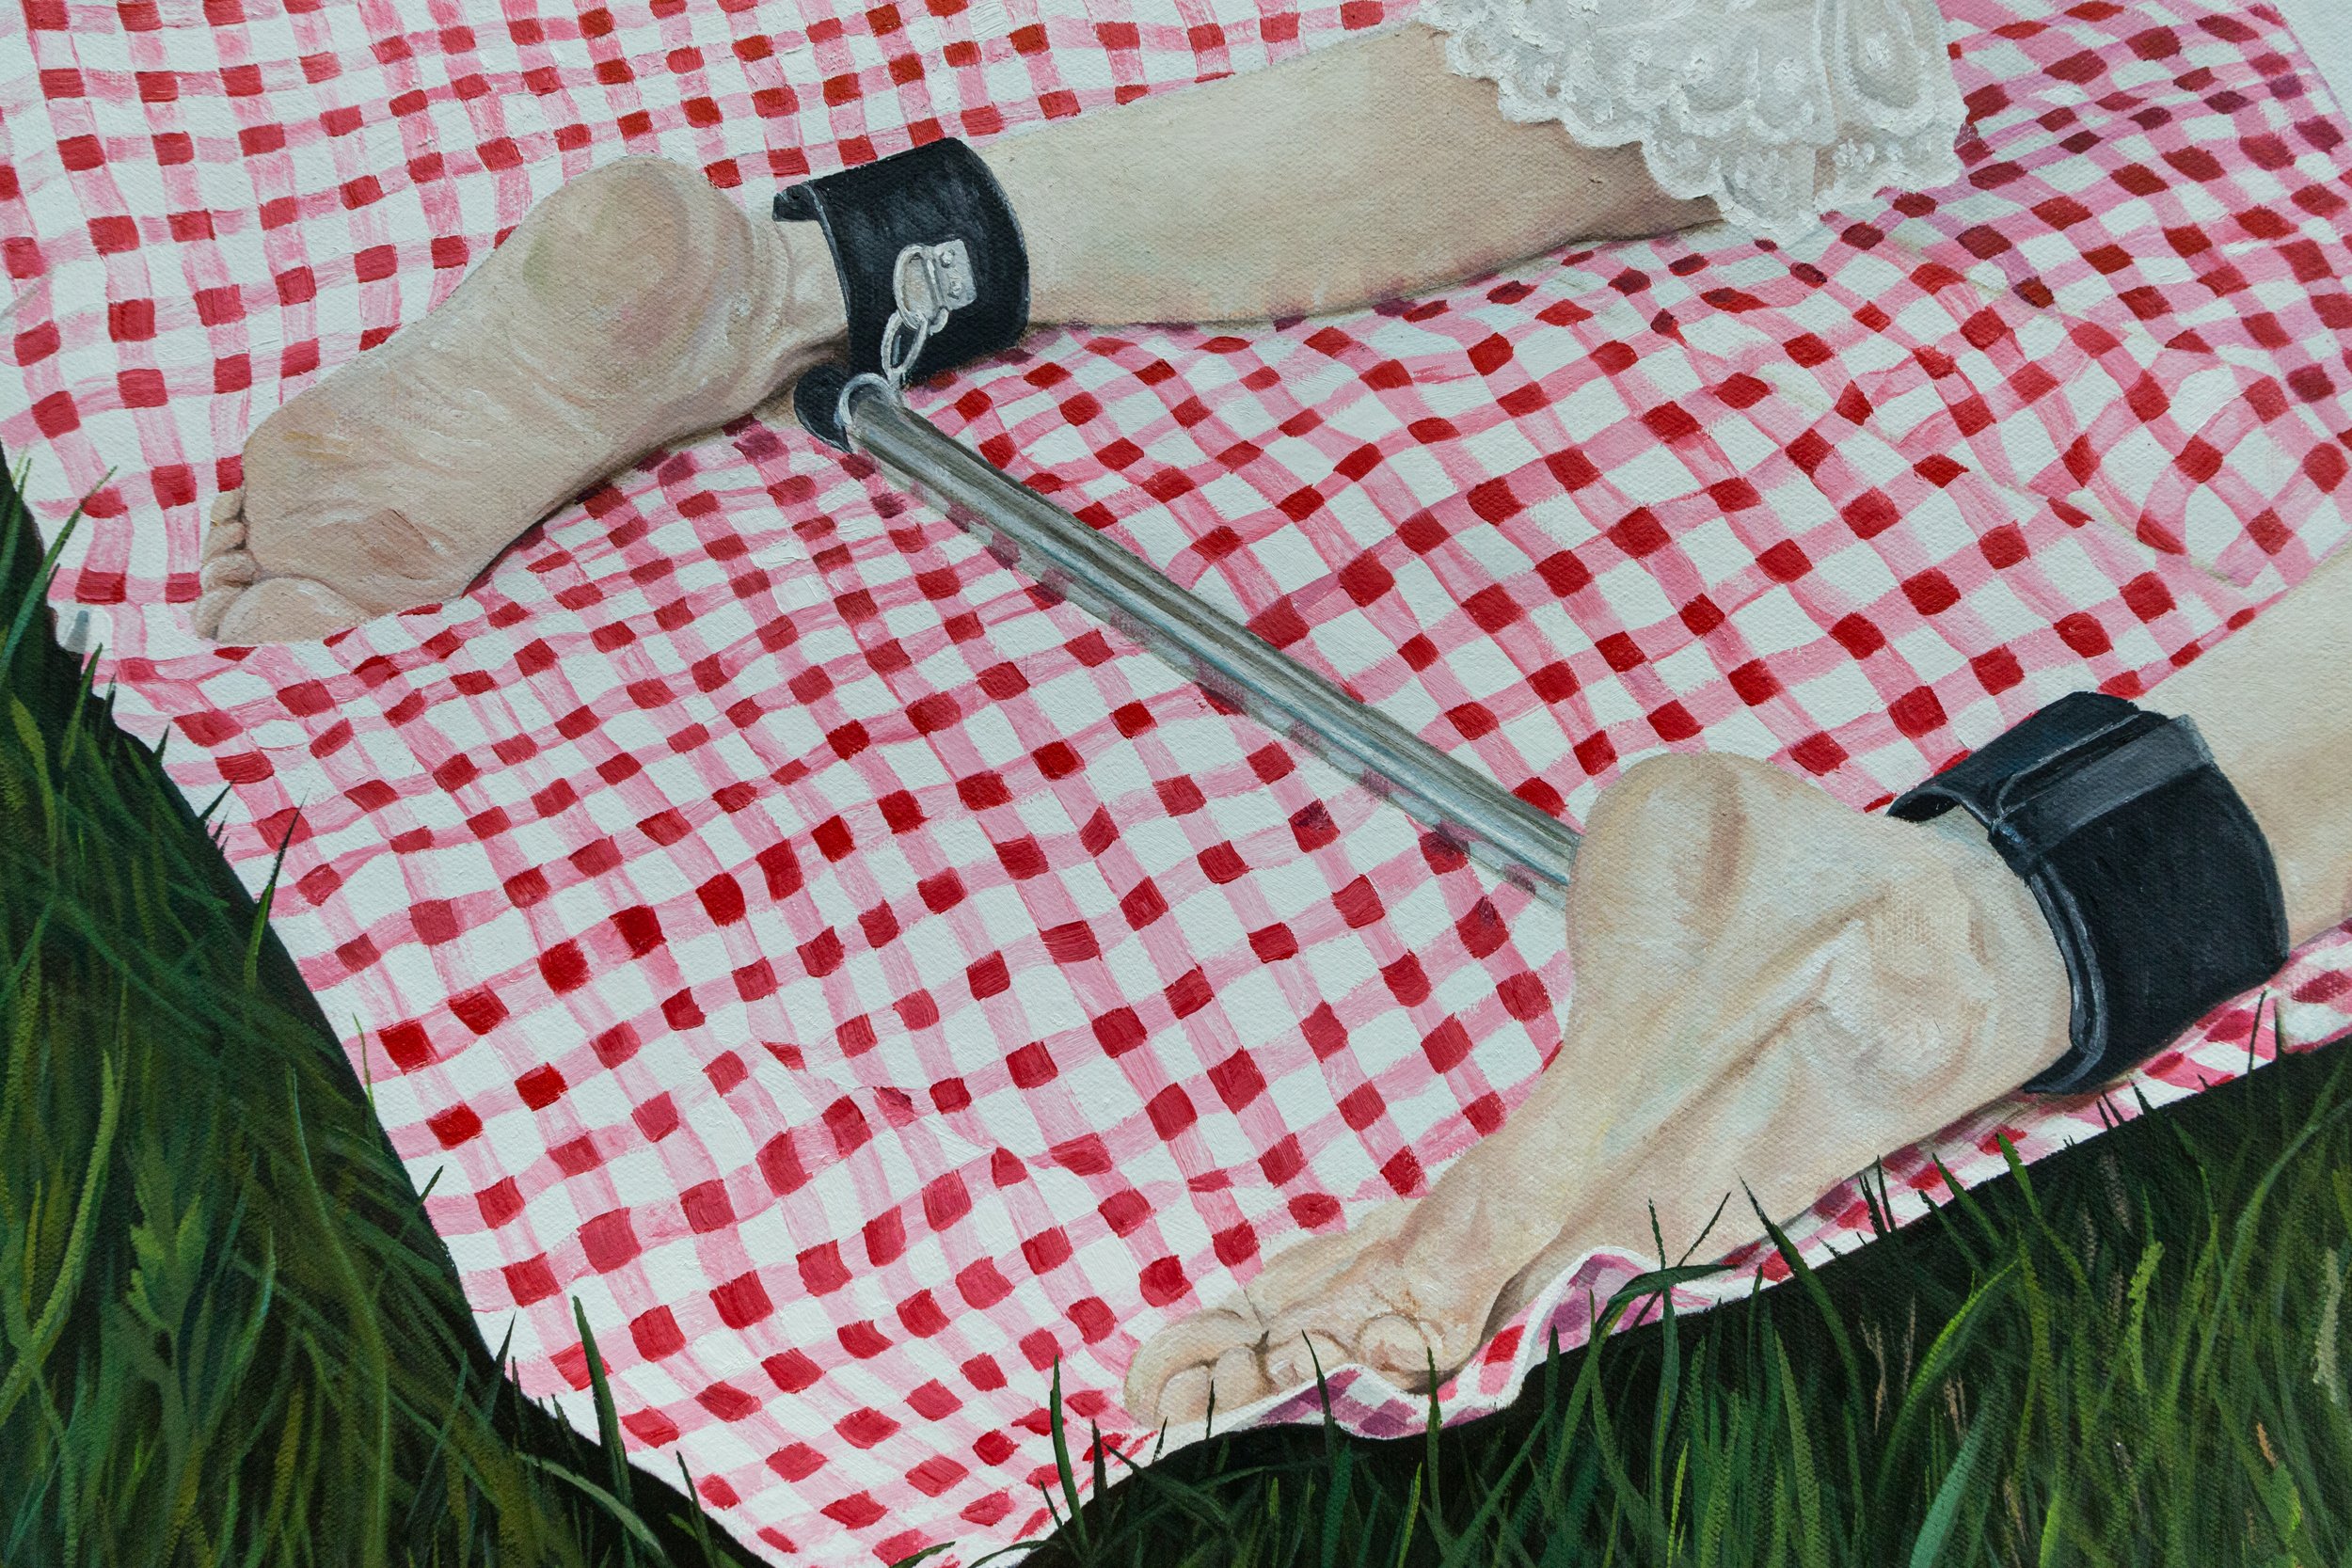 NT0003_Picnicfortwo_2021_30x40in_Courtesyoftheartistanddeboer,losangeles,ca_Detail1.jpg